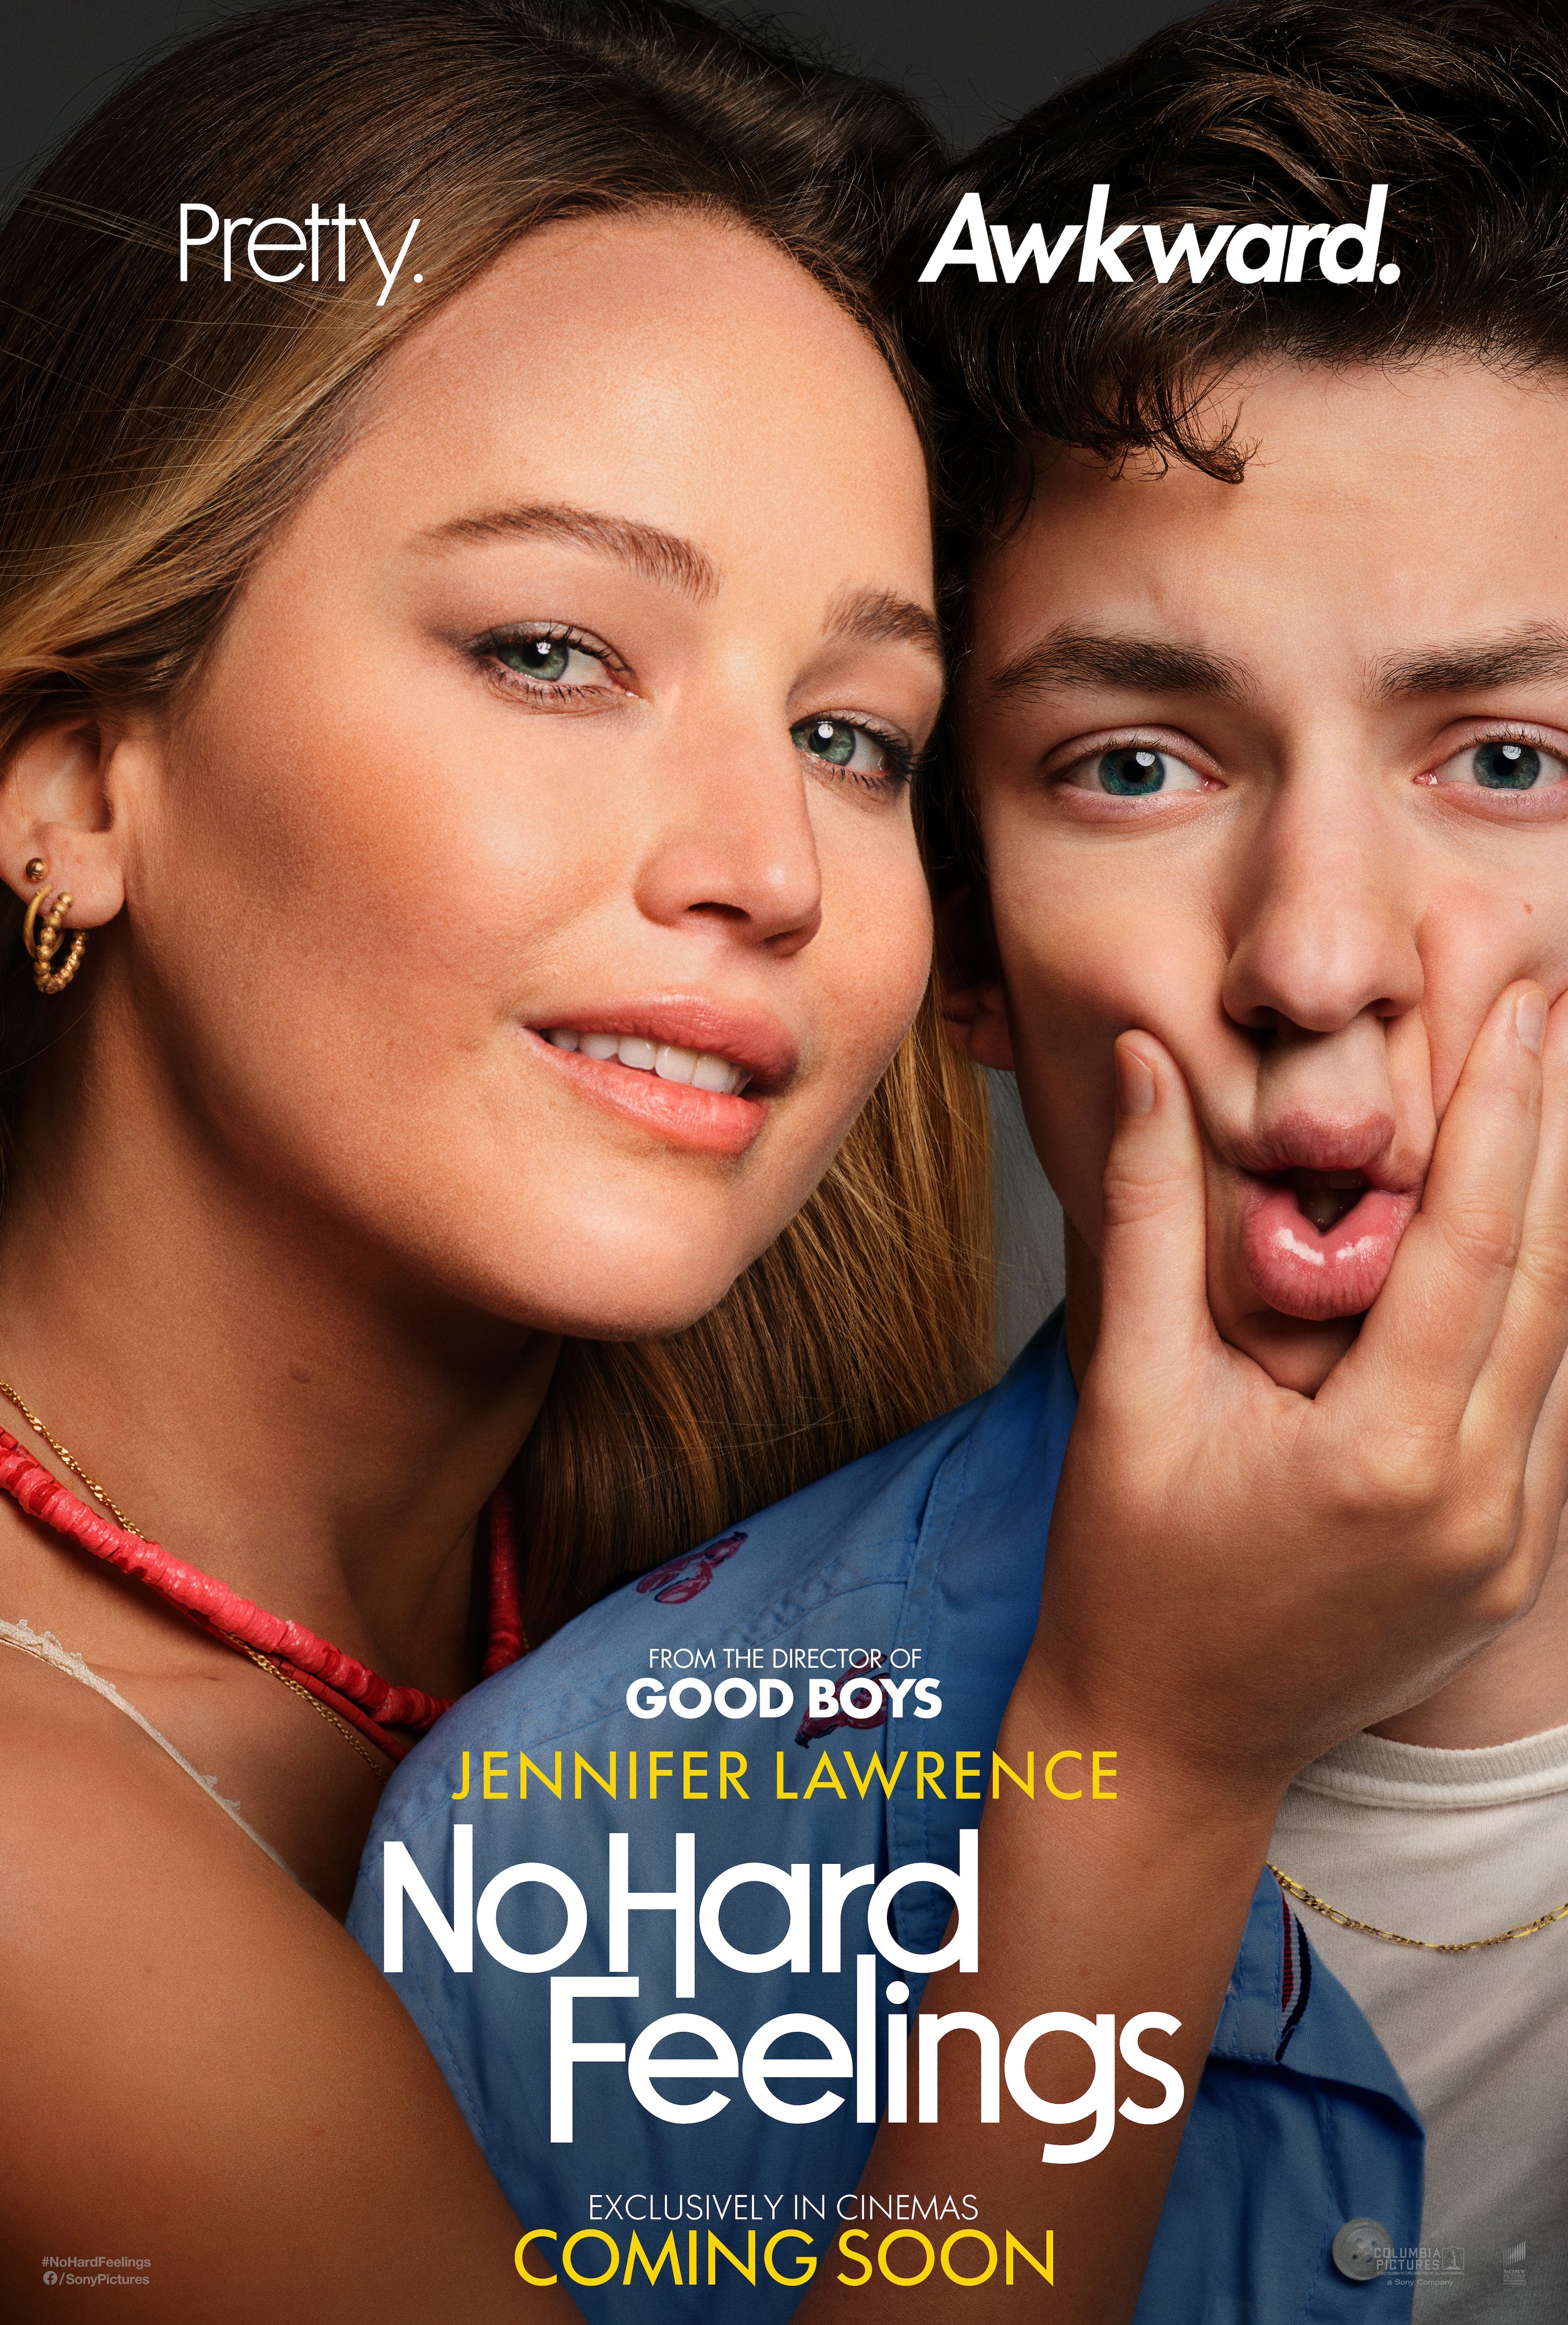 No Hard Feelings images © Columbia Pictures